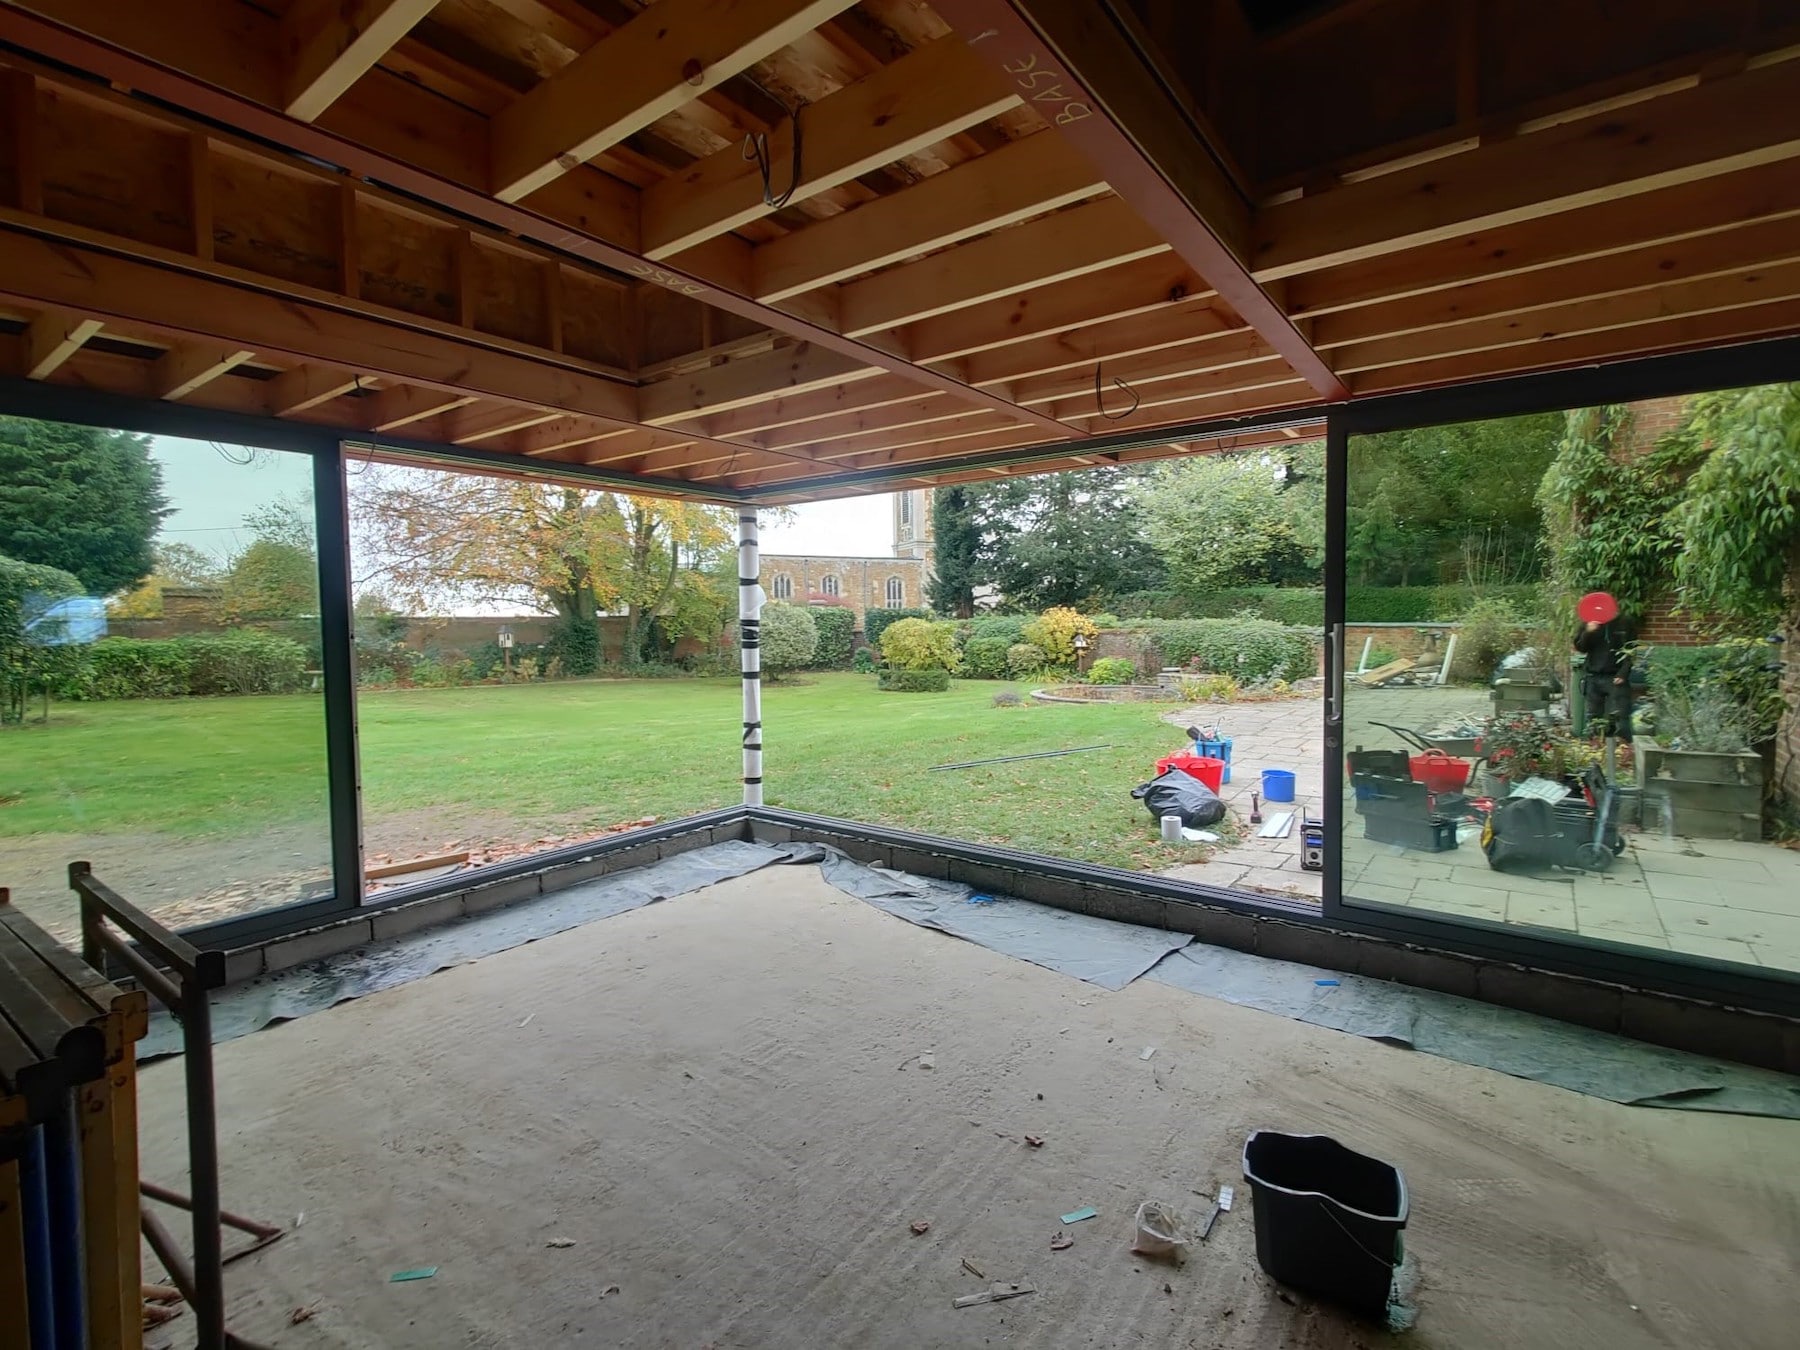 Fully open patio doors with no visible corner